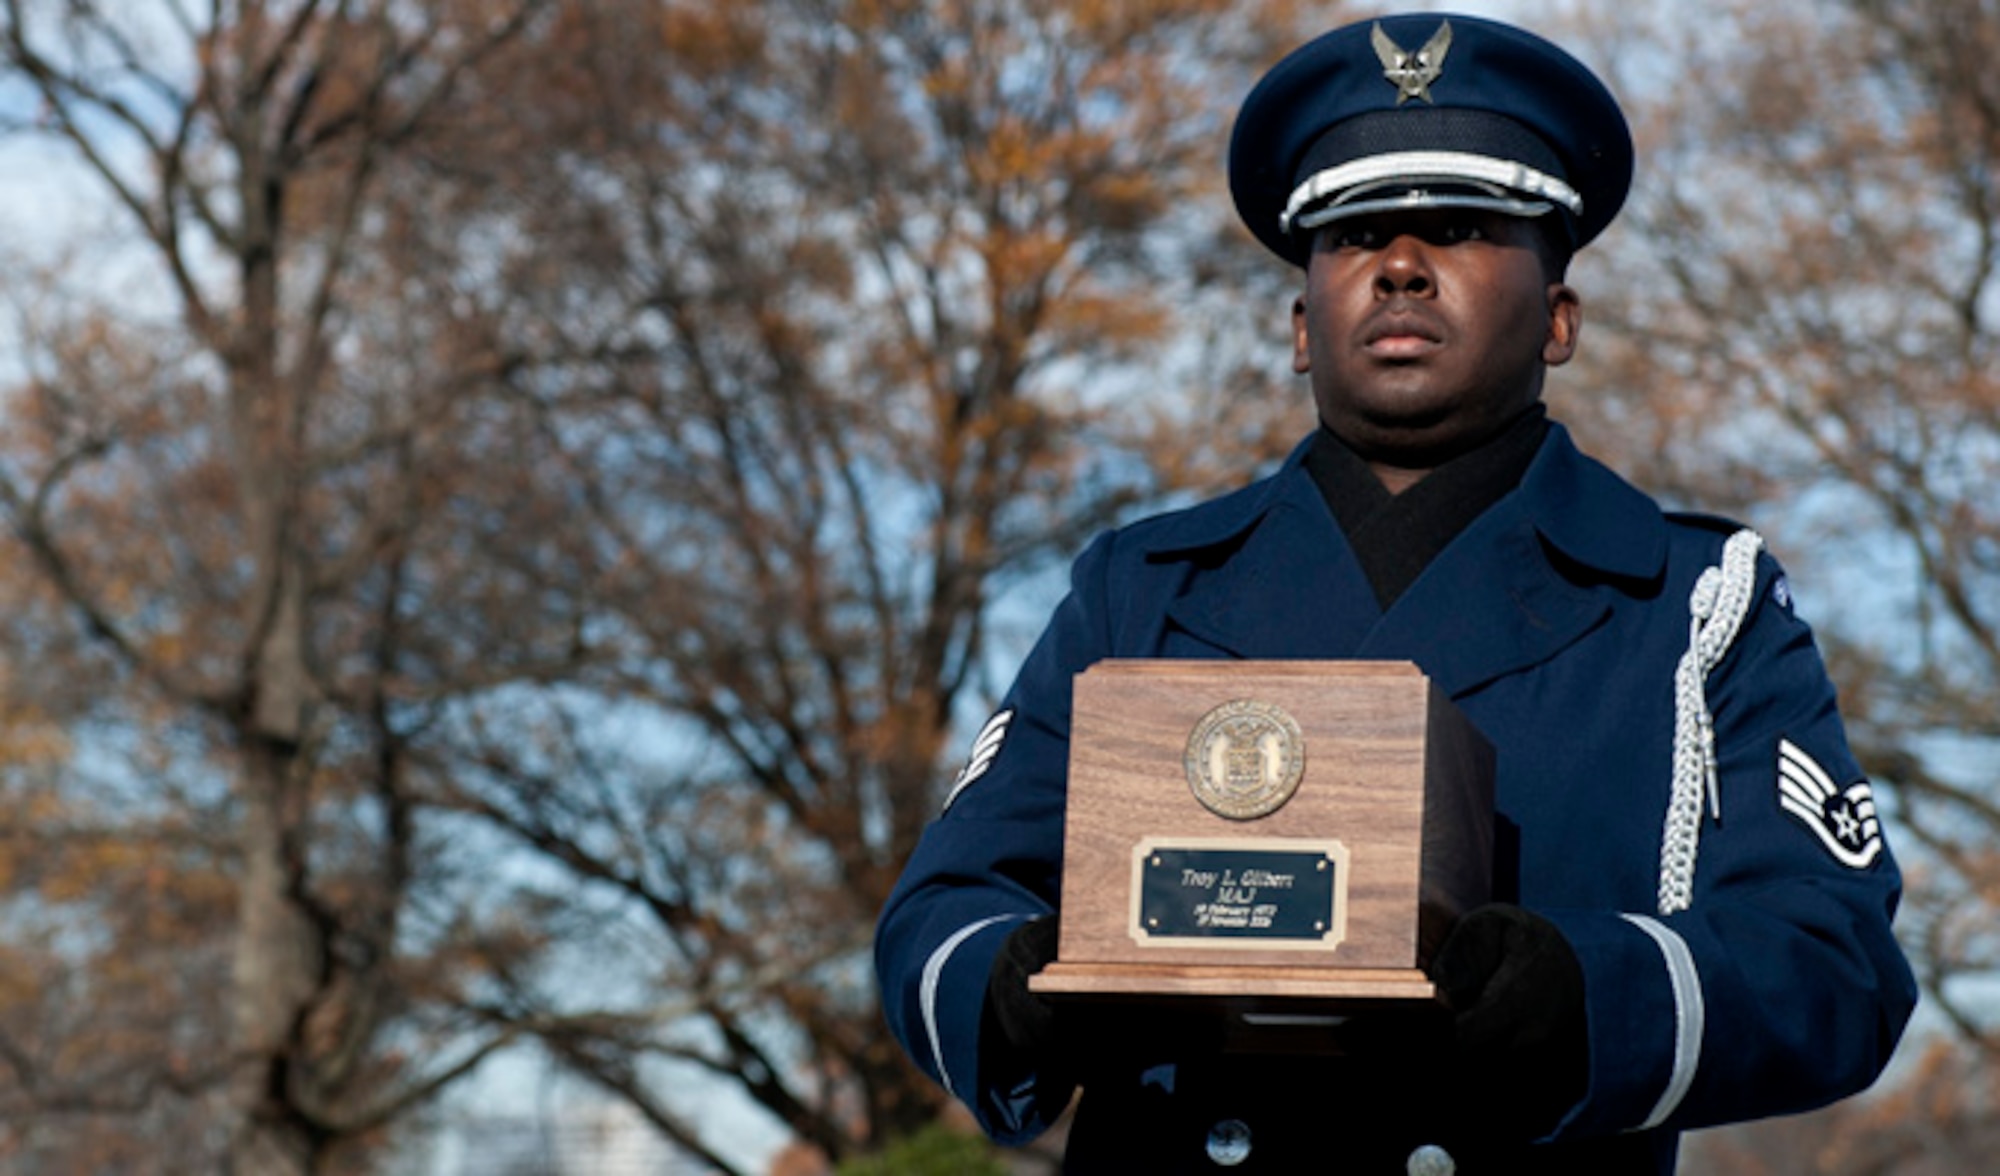 A member of the U. S. Air Force Honor Guard carries the recently recovered remains of Maj. Troy Gilbert, during a remembrance funeral seven years to the day of his first military burial at Arlington Cemetery, Dec. 11, 2013. (U.S. Air Force photo by Staff Sgt. Carlin Leslie)